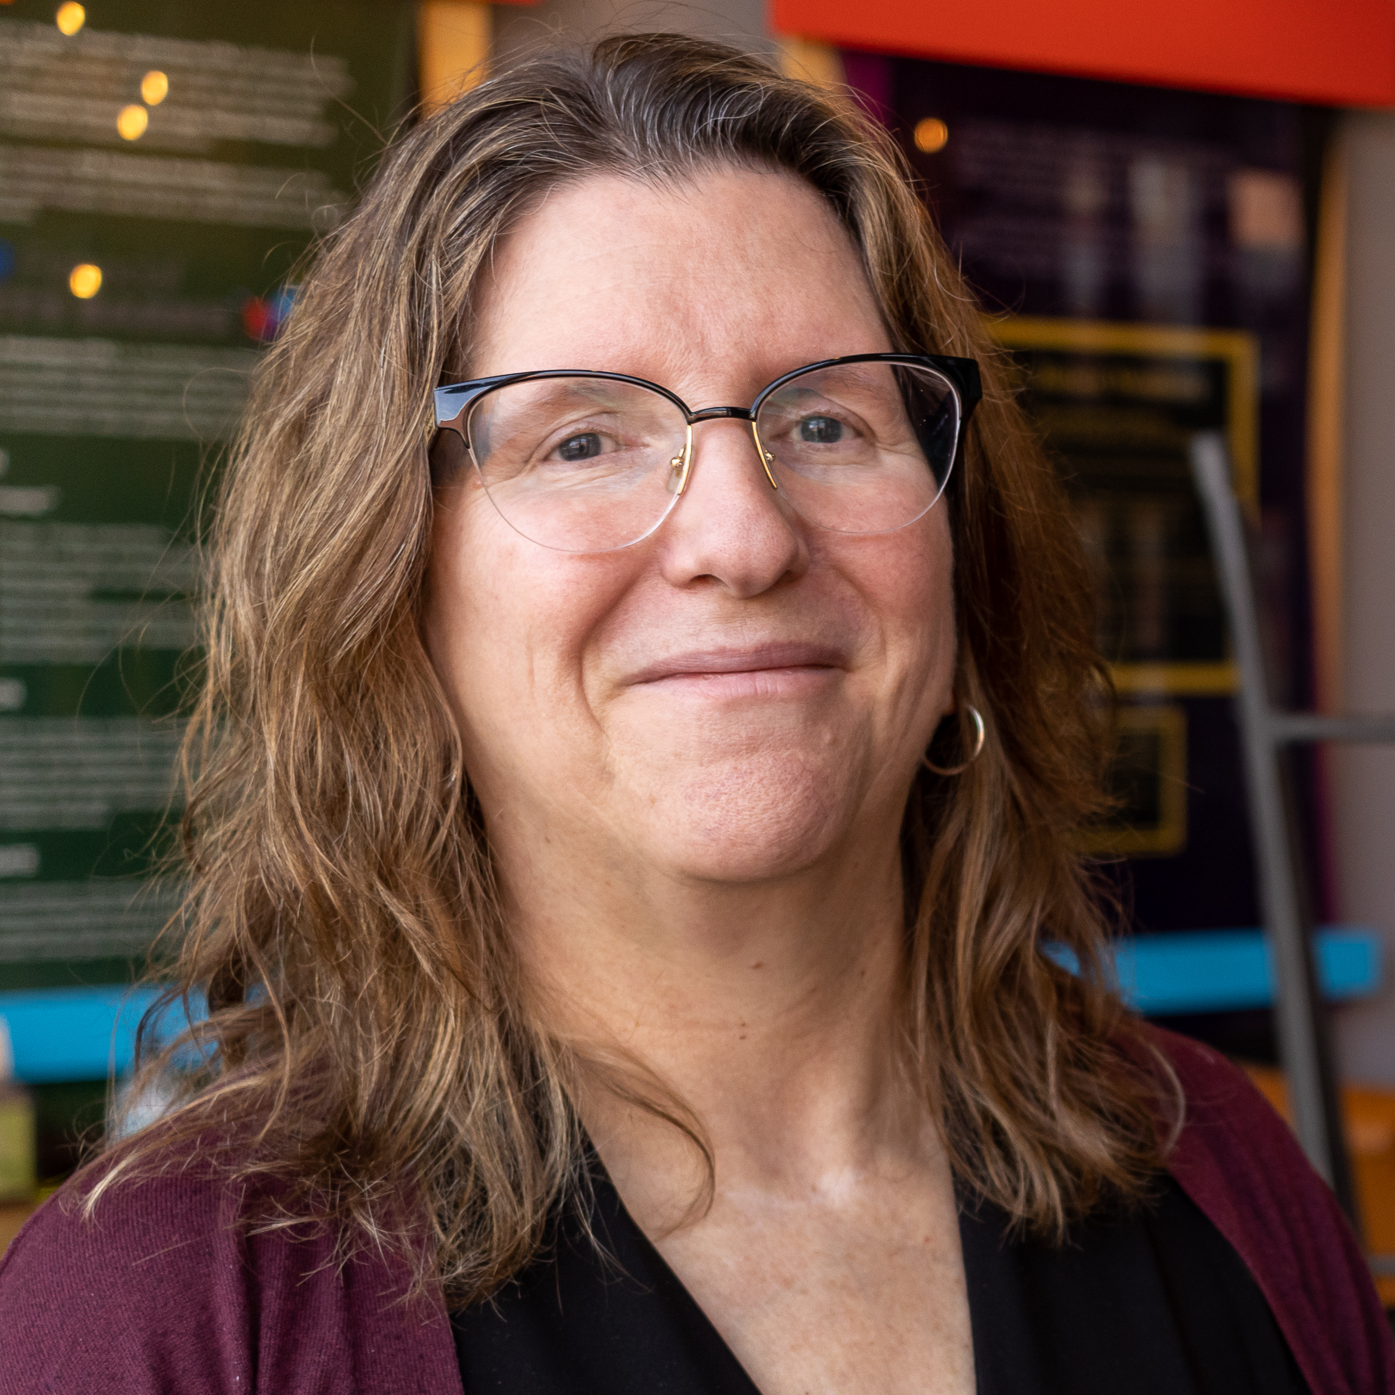 Joanne Weber - Woman with long brown curly hair wearing glasses and smiling.